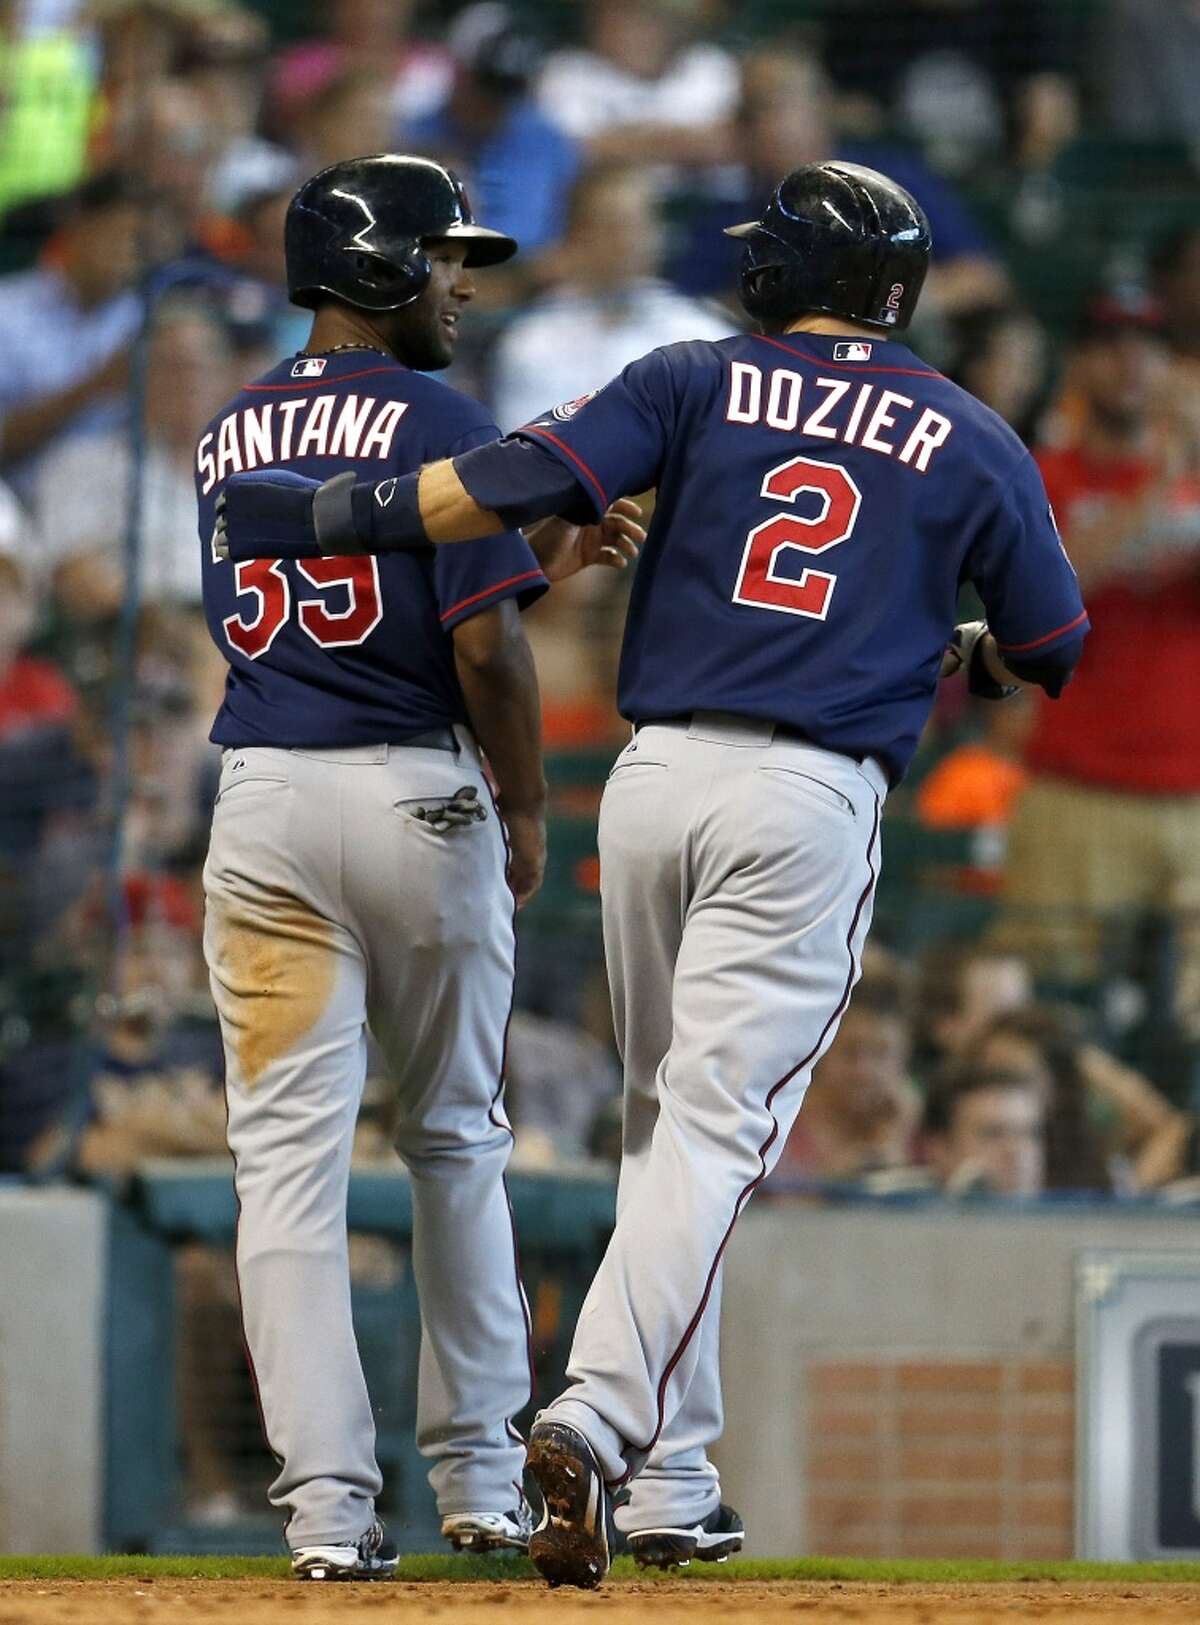 Twins second baseman Brian Dozier (2) and center fielder Danny Santana (39) celebrate after scoring runs on a single hit by first baseman Kennys Vargas during the eighth inning.